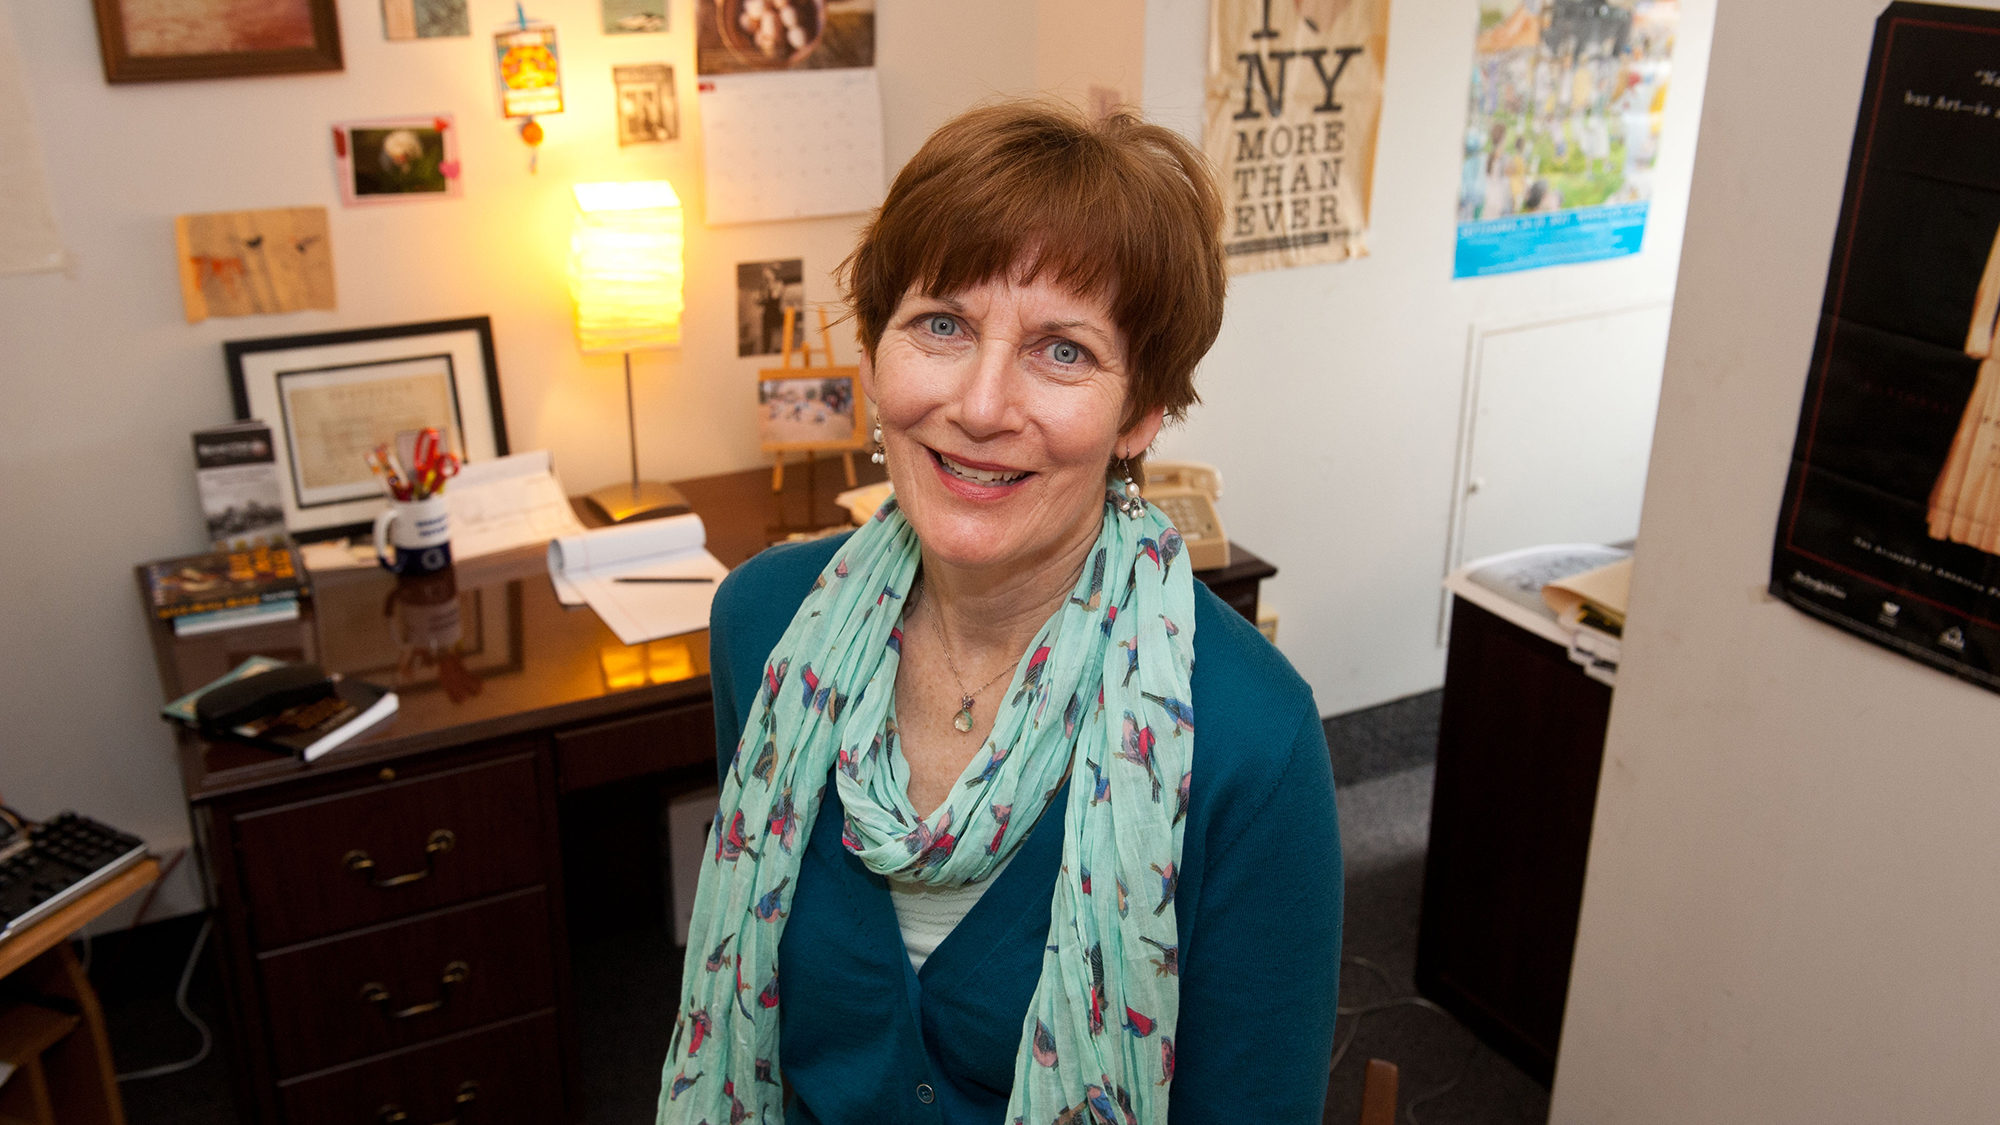 Maureen Corrigan sits in front of her desk with posters on the wall